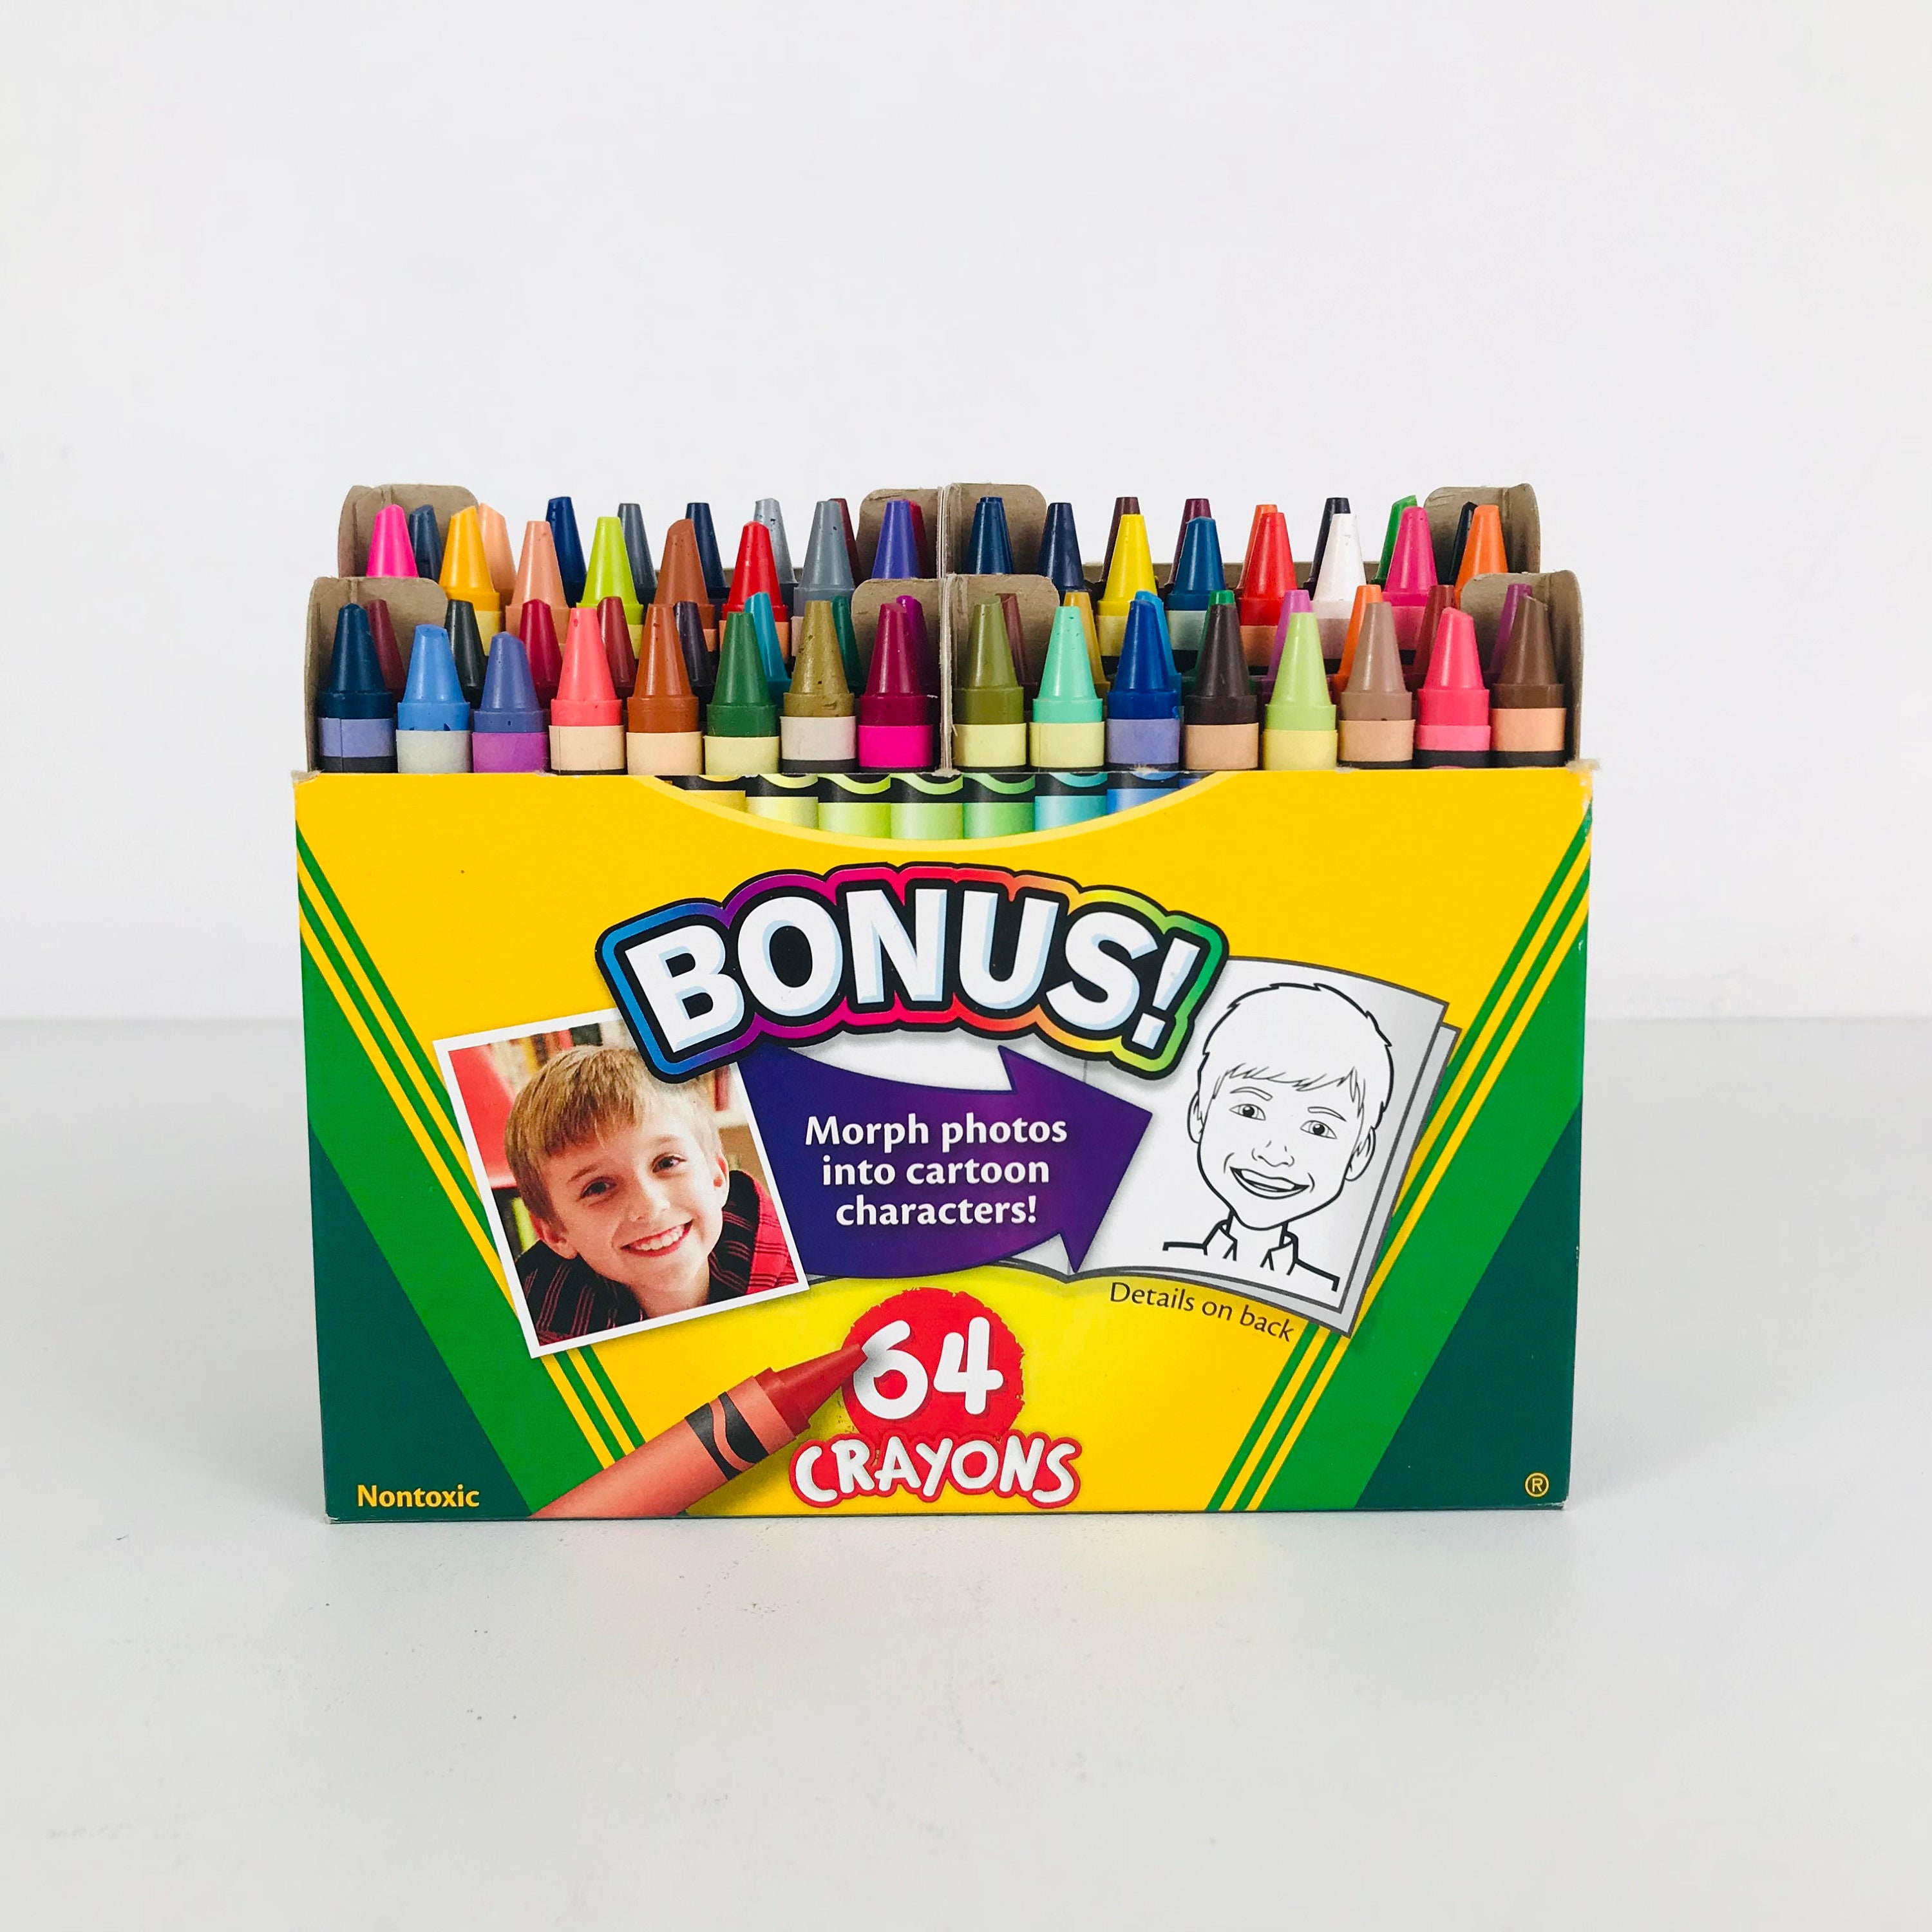 Save on Crayola Crayons Colors of The World Order Online Delivery